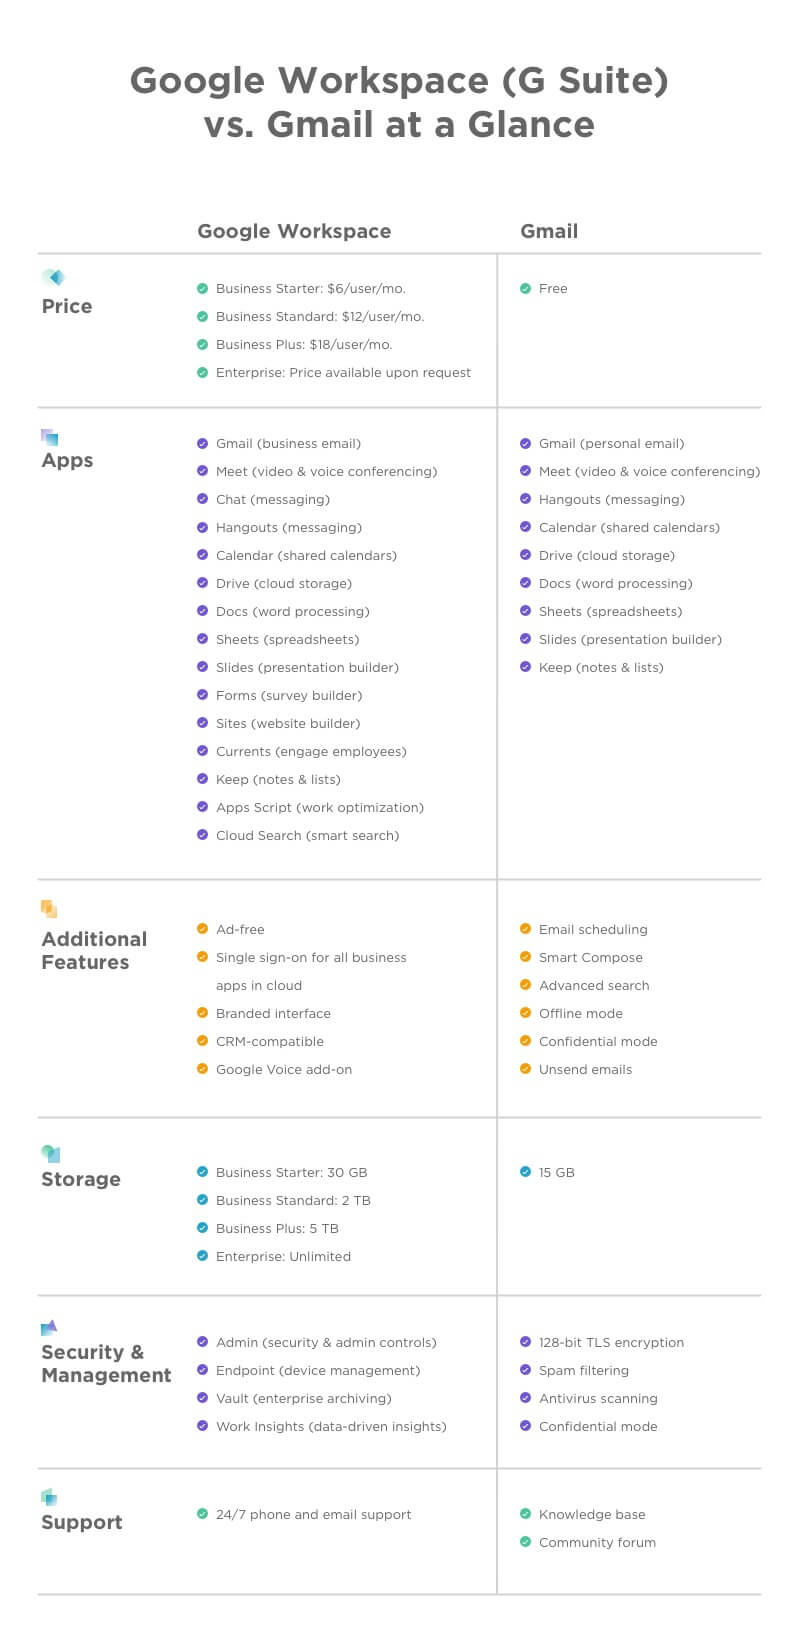 An infographic titled 'Google Workspace (G Suite) vs. Gmail at a Glance' details a comparison between the two services. It lists pricing tiers for Google Workspace, which range from $6 to $18 per user per month, and mentions Enterprise pricing on request, while Gmail is free. It compares apps, additional features, storage options, security & management, and support services for each. Google Workspace offers a comprehensive suite of business tools including Gmail for business, Meet, Drive, Docs, Sheets, and additional admin and security features, whereas Gmail provides basic email functionalities along with a set of consumer-grade tools and services.